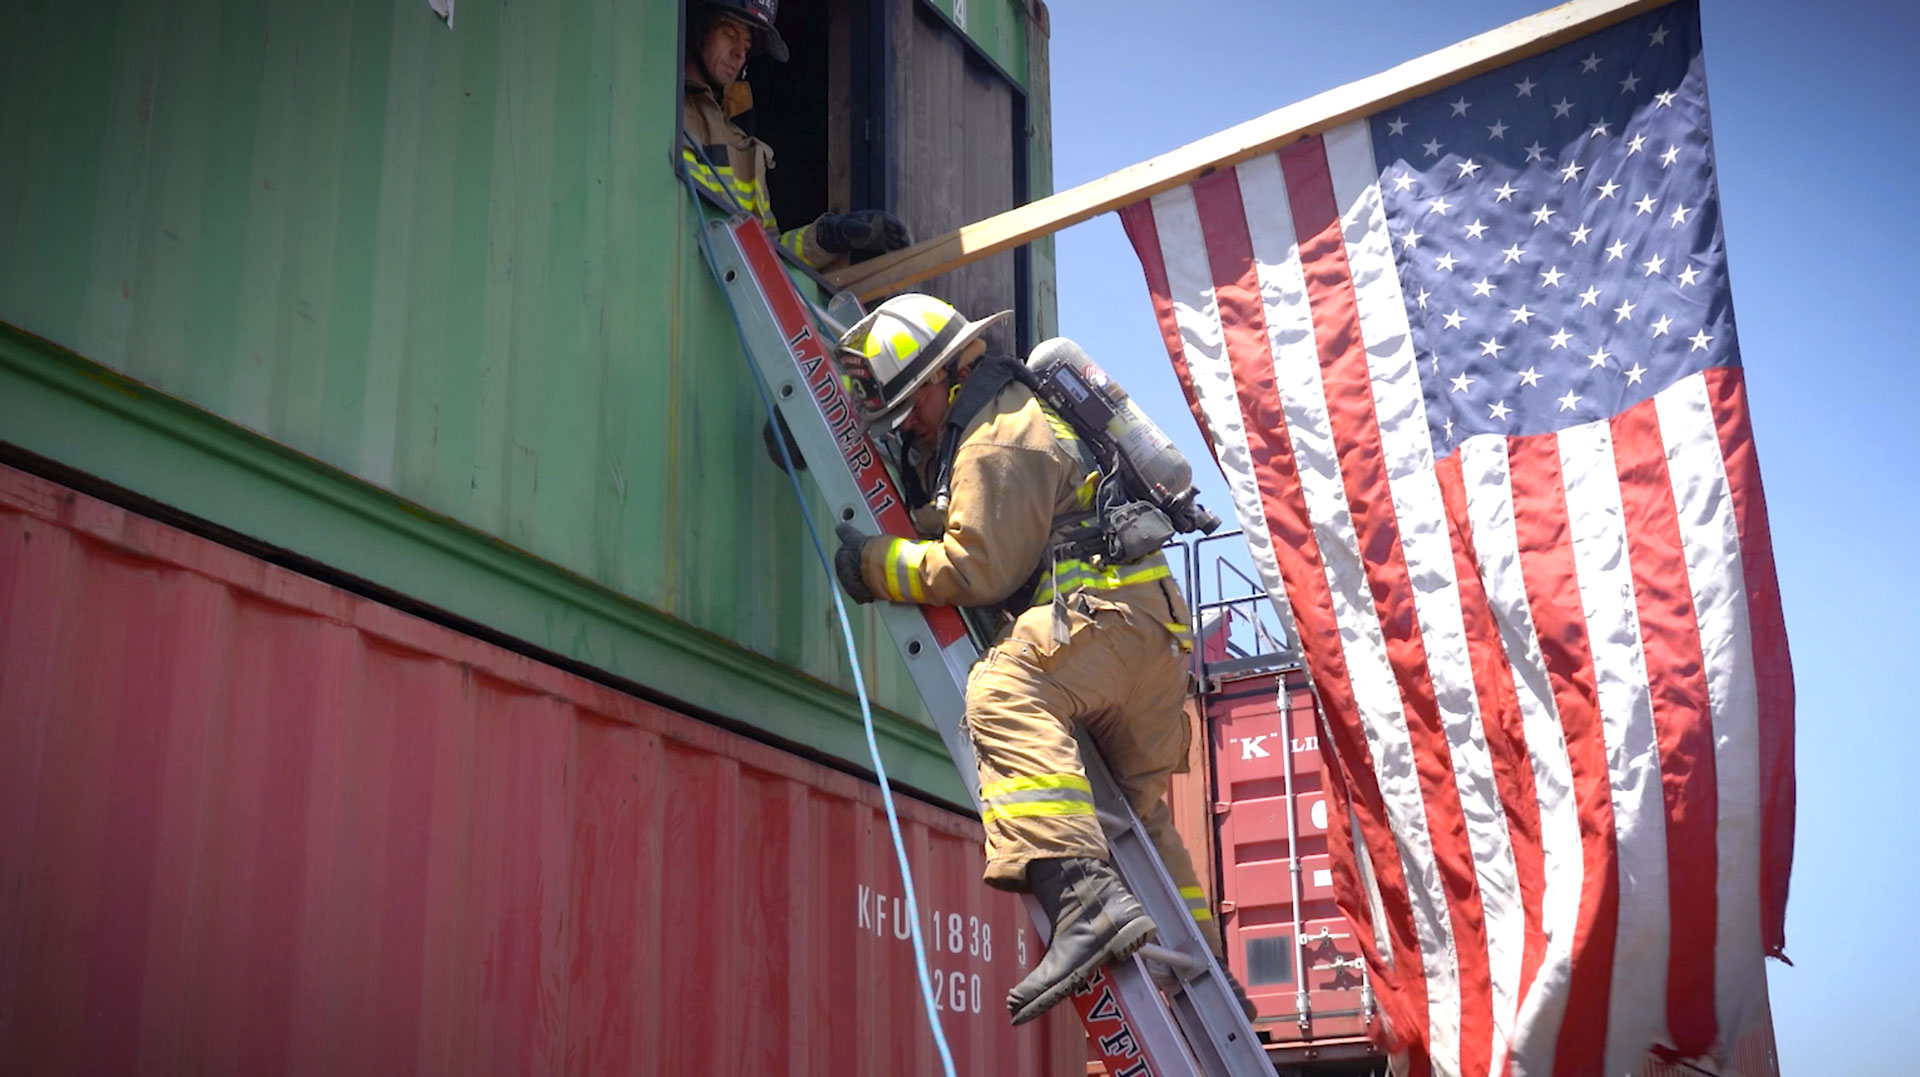 Featured image for “Firefighter Flag Unveil”